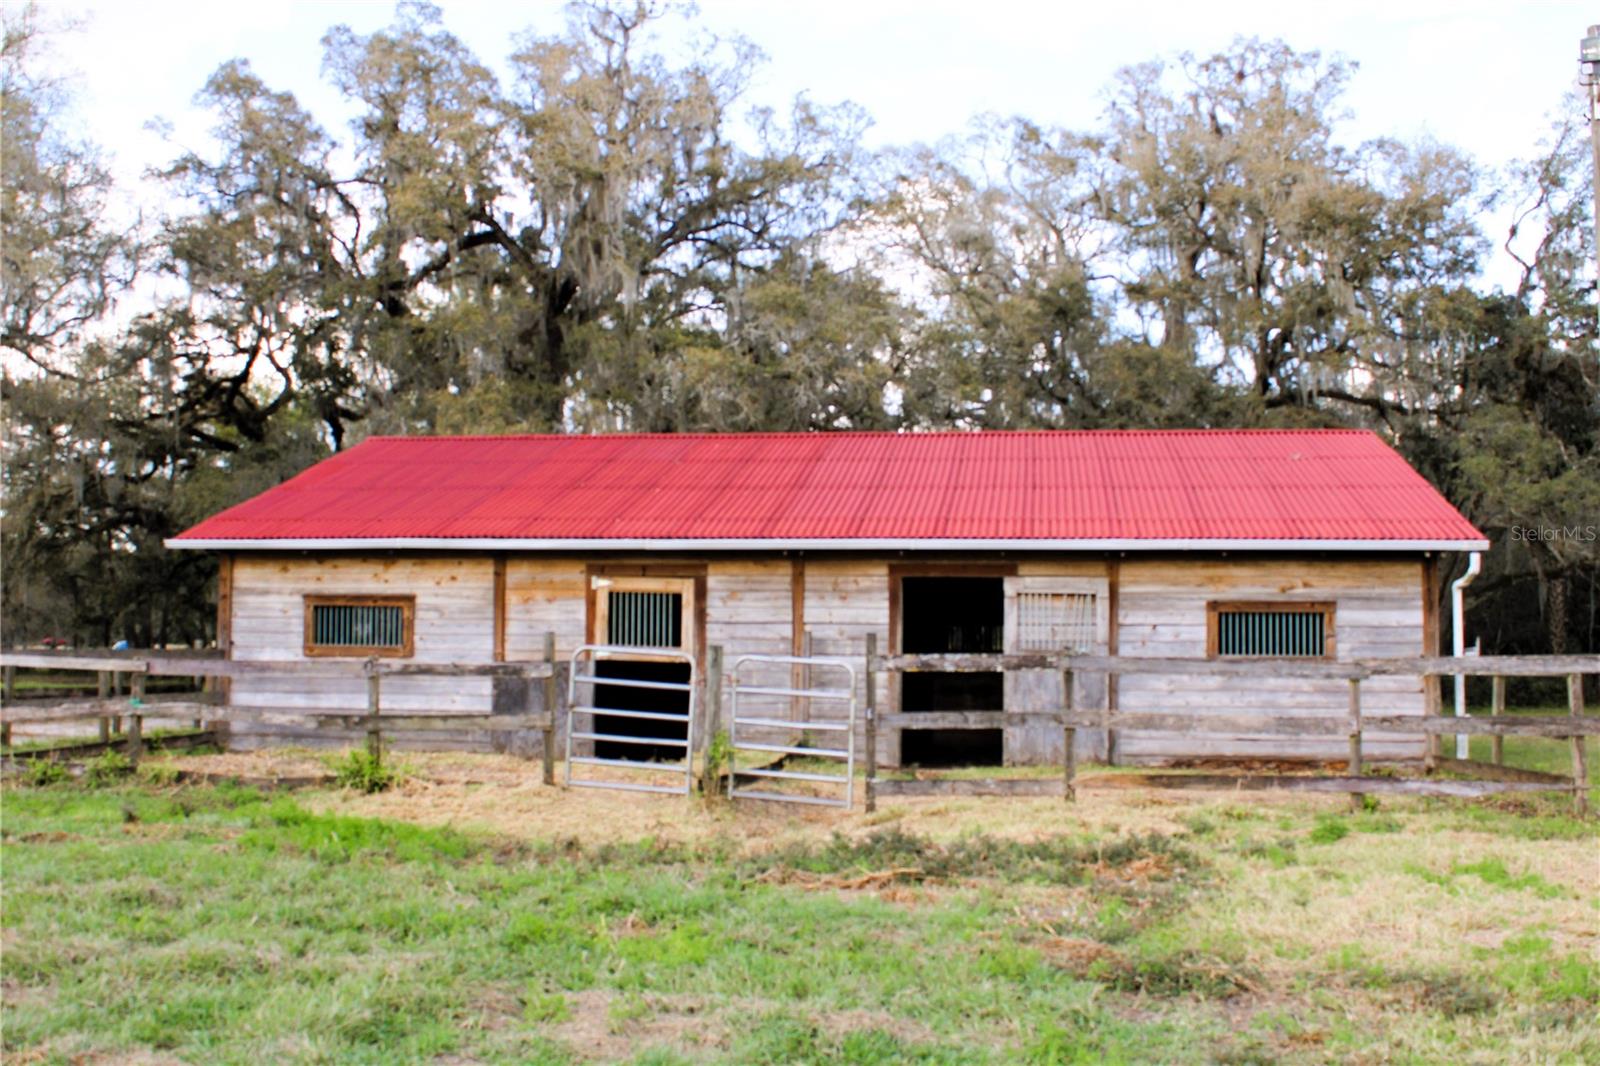 back side With run in Stalls